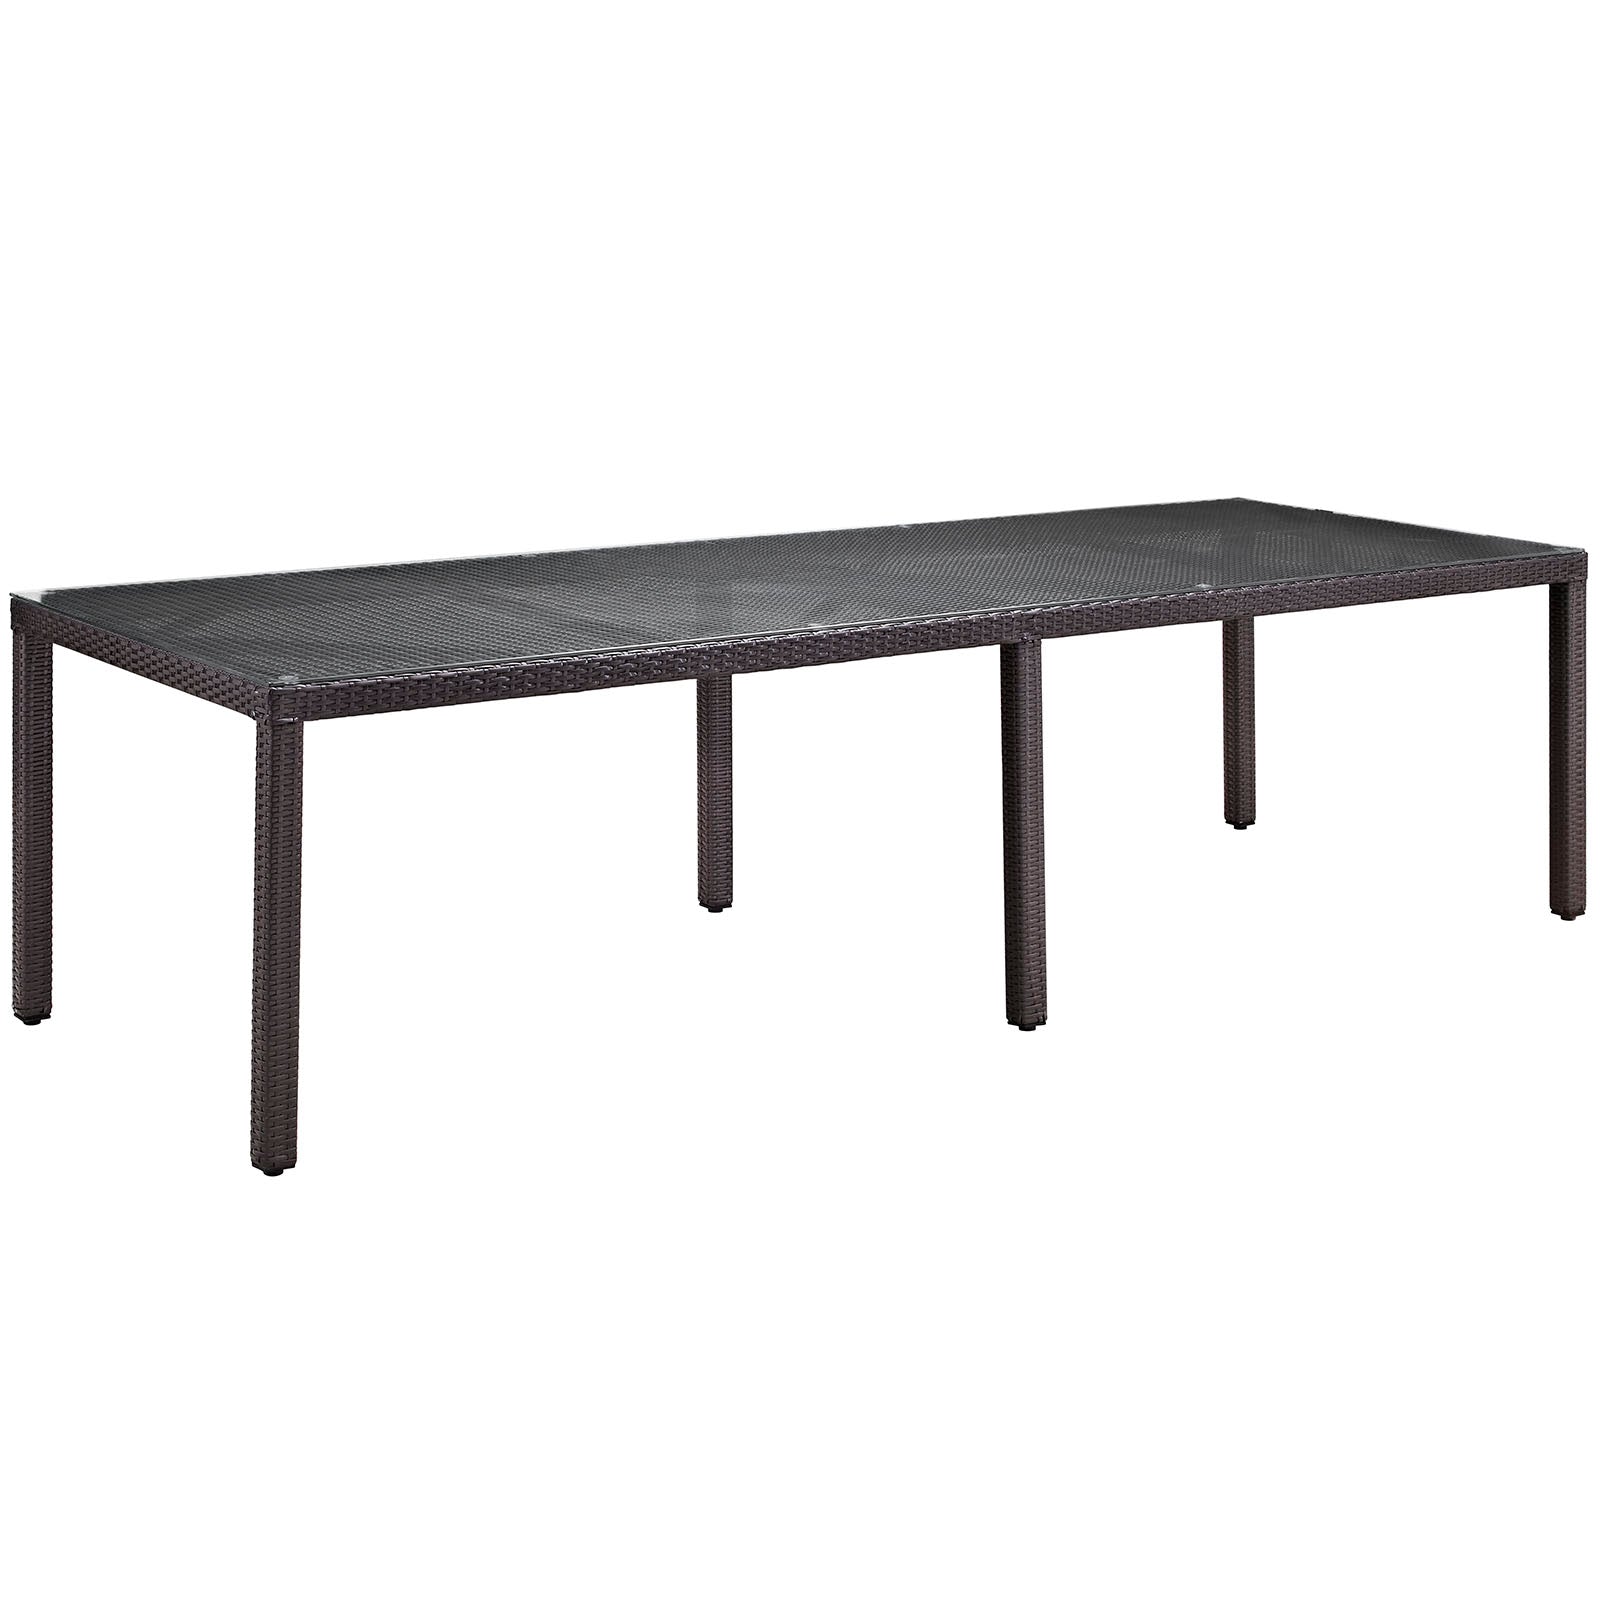 Convene 114" Outdoor Patio Dining Table - East Shore Modern Home Furnishings